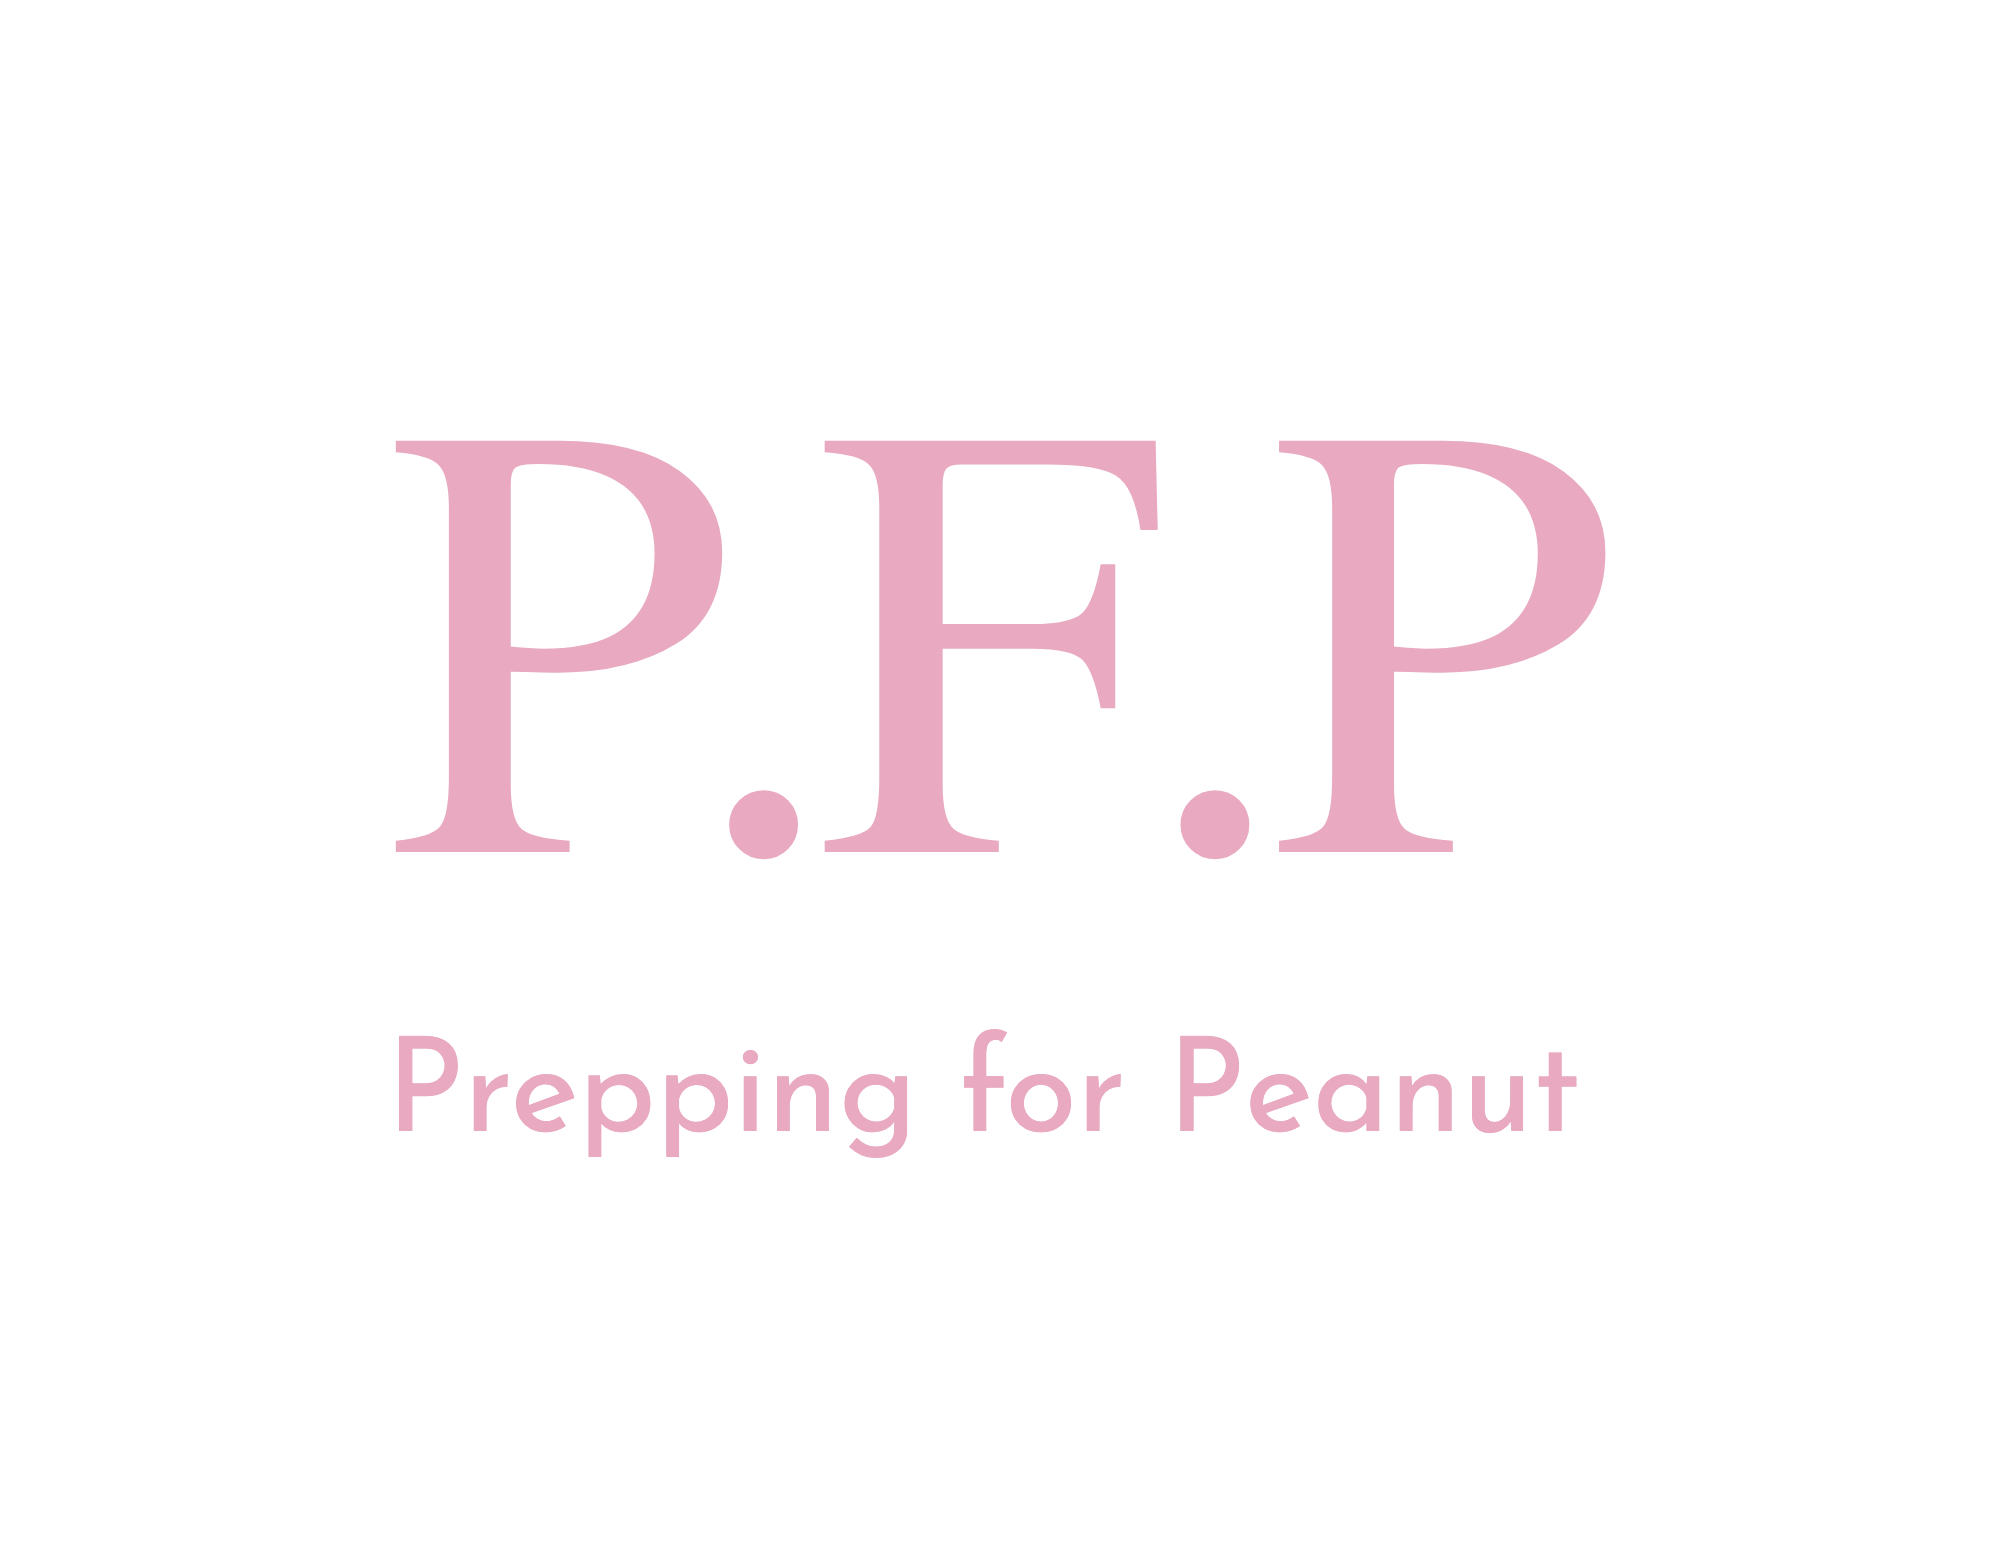 Prepping for Peanut